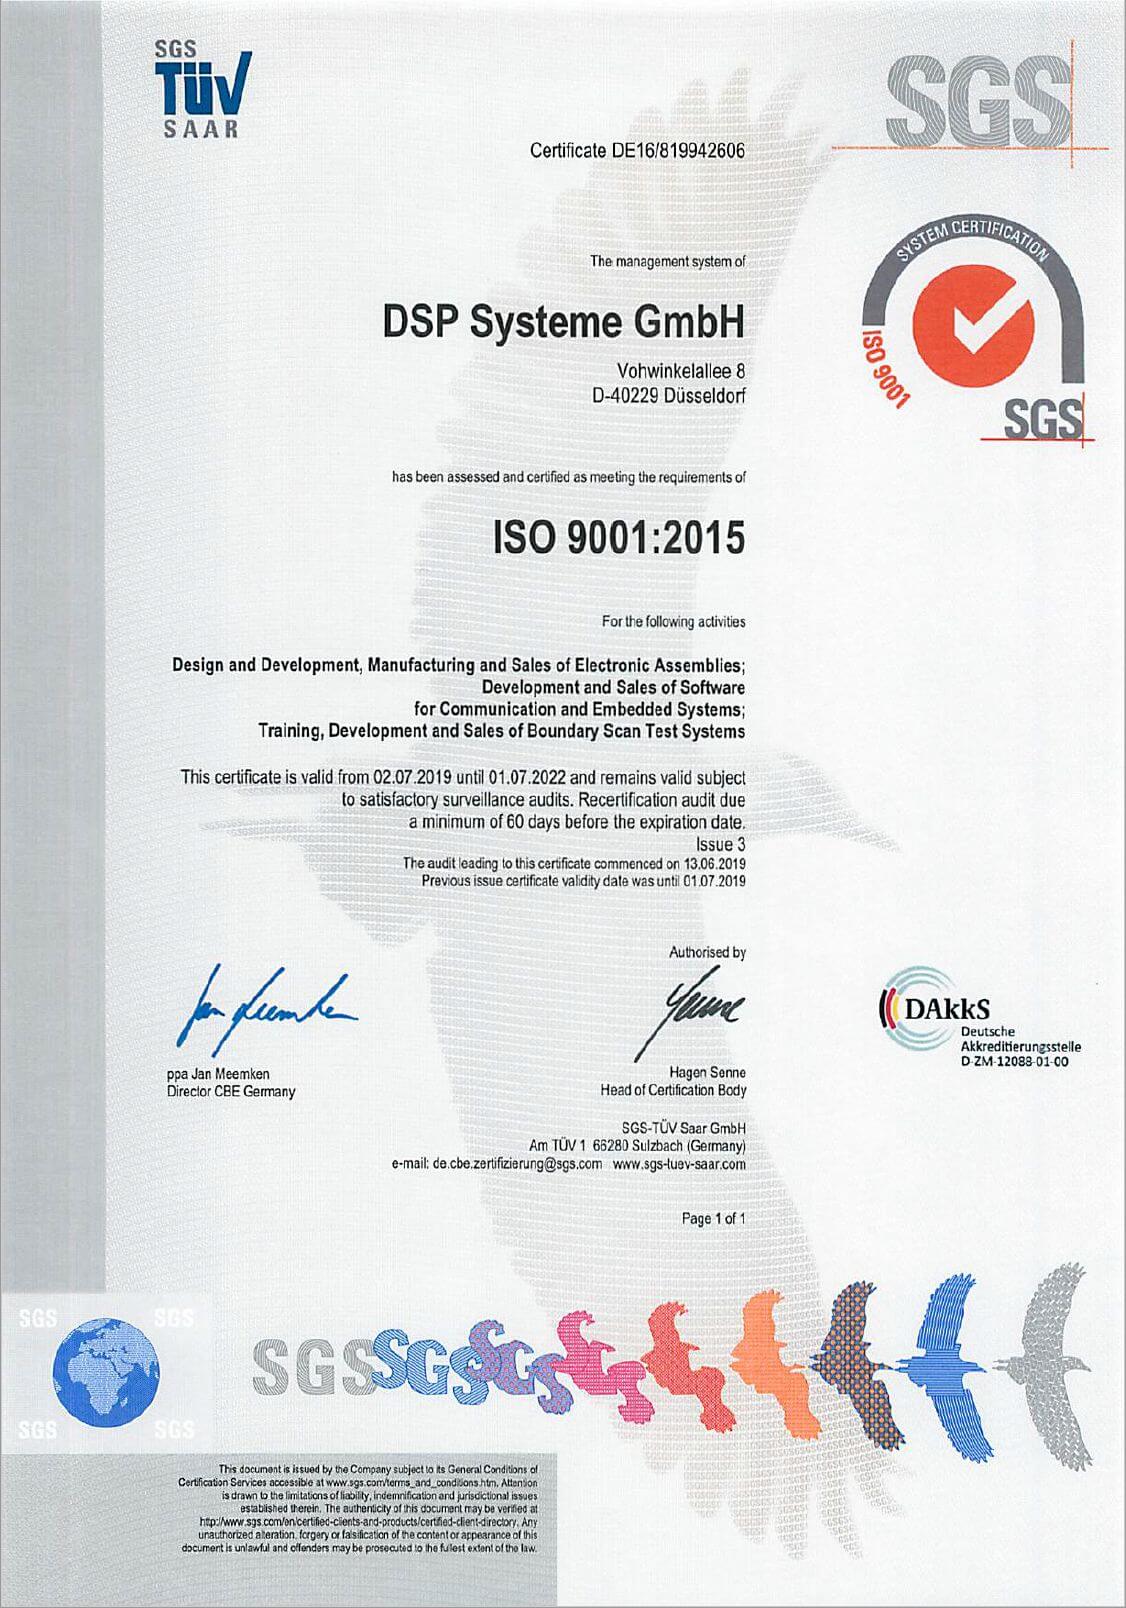 Certification per ISO9001-2015 for A.R. Bayer DSP Systeme GmbH